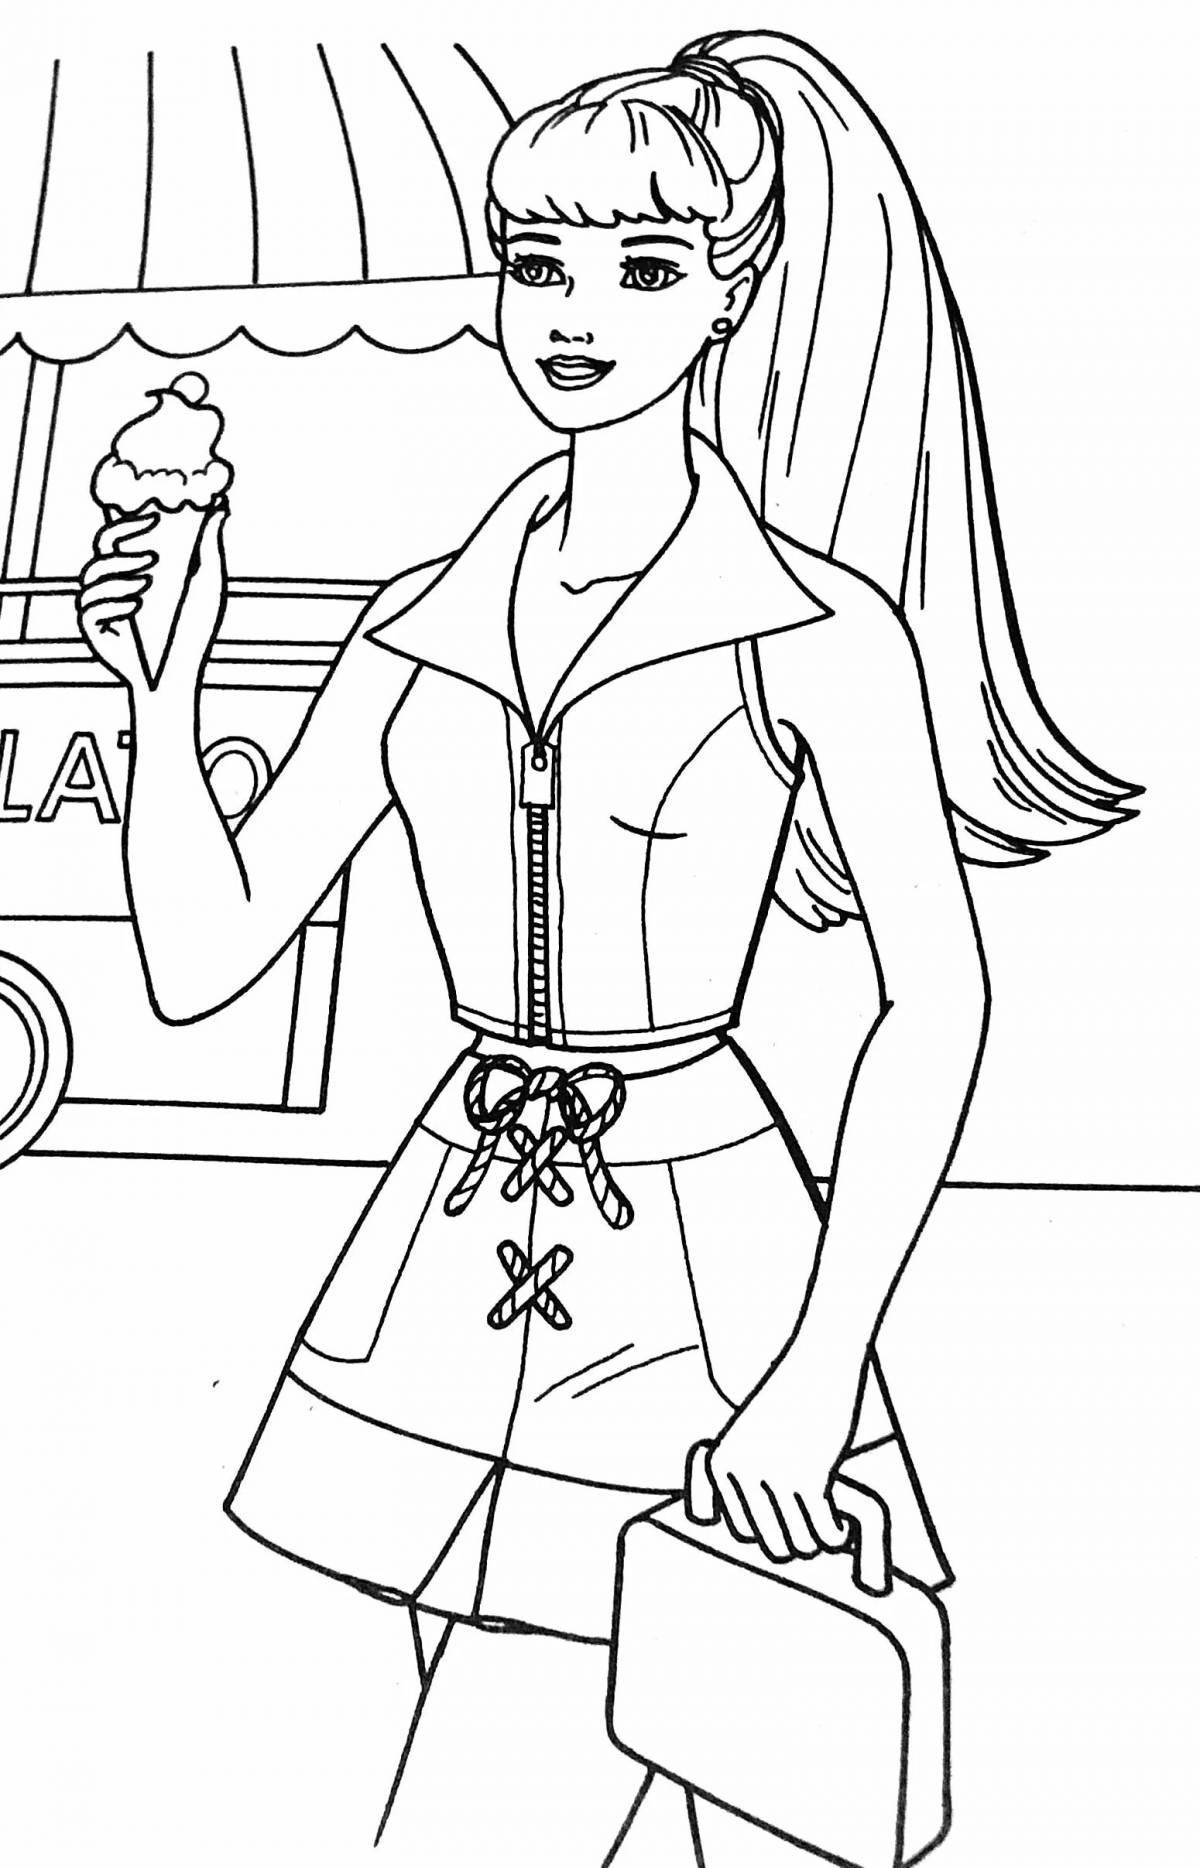 Old barbie live coloring